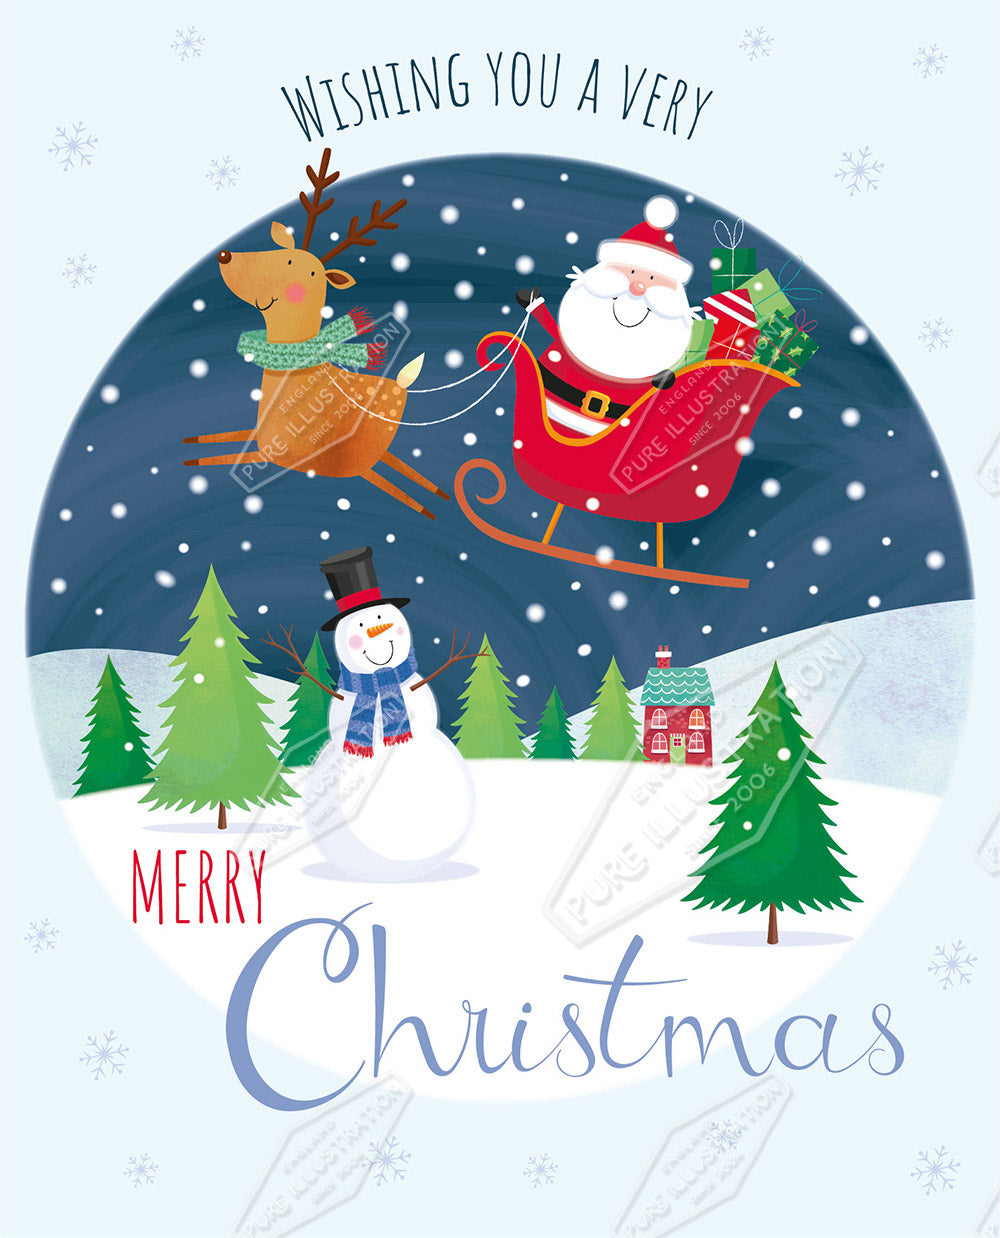 00035555SPI - Christmas Gift Bag & Greeting Card Design - Sarah Pitt is represented by Pure Art Licensing Agency - Christmas Greeting Card